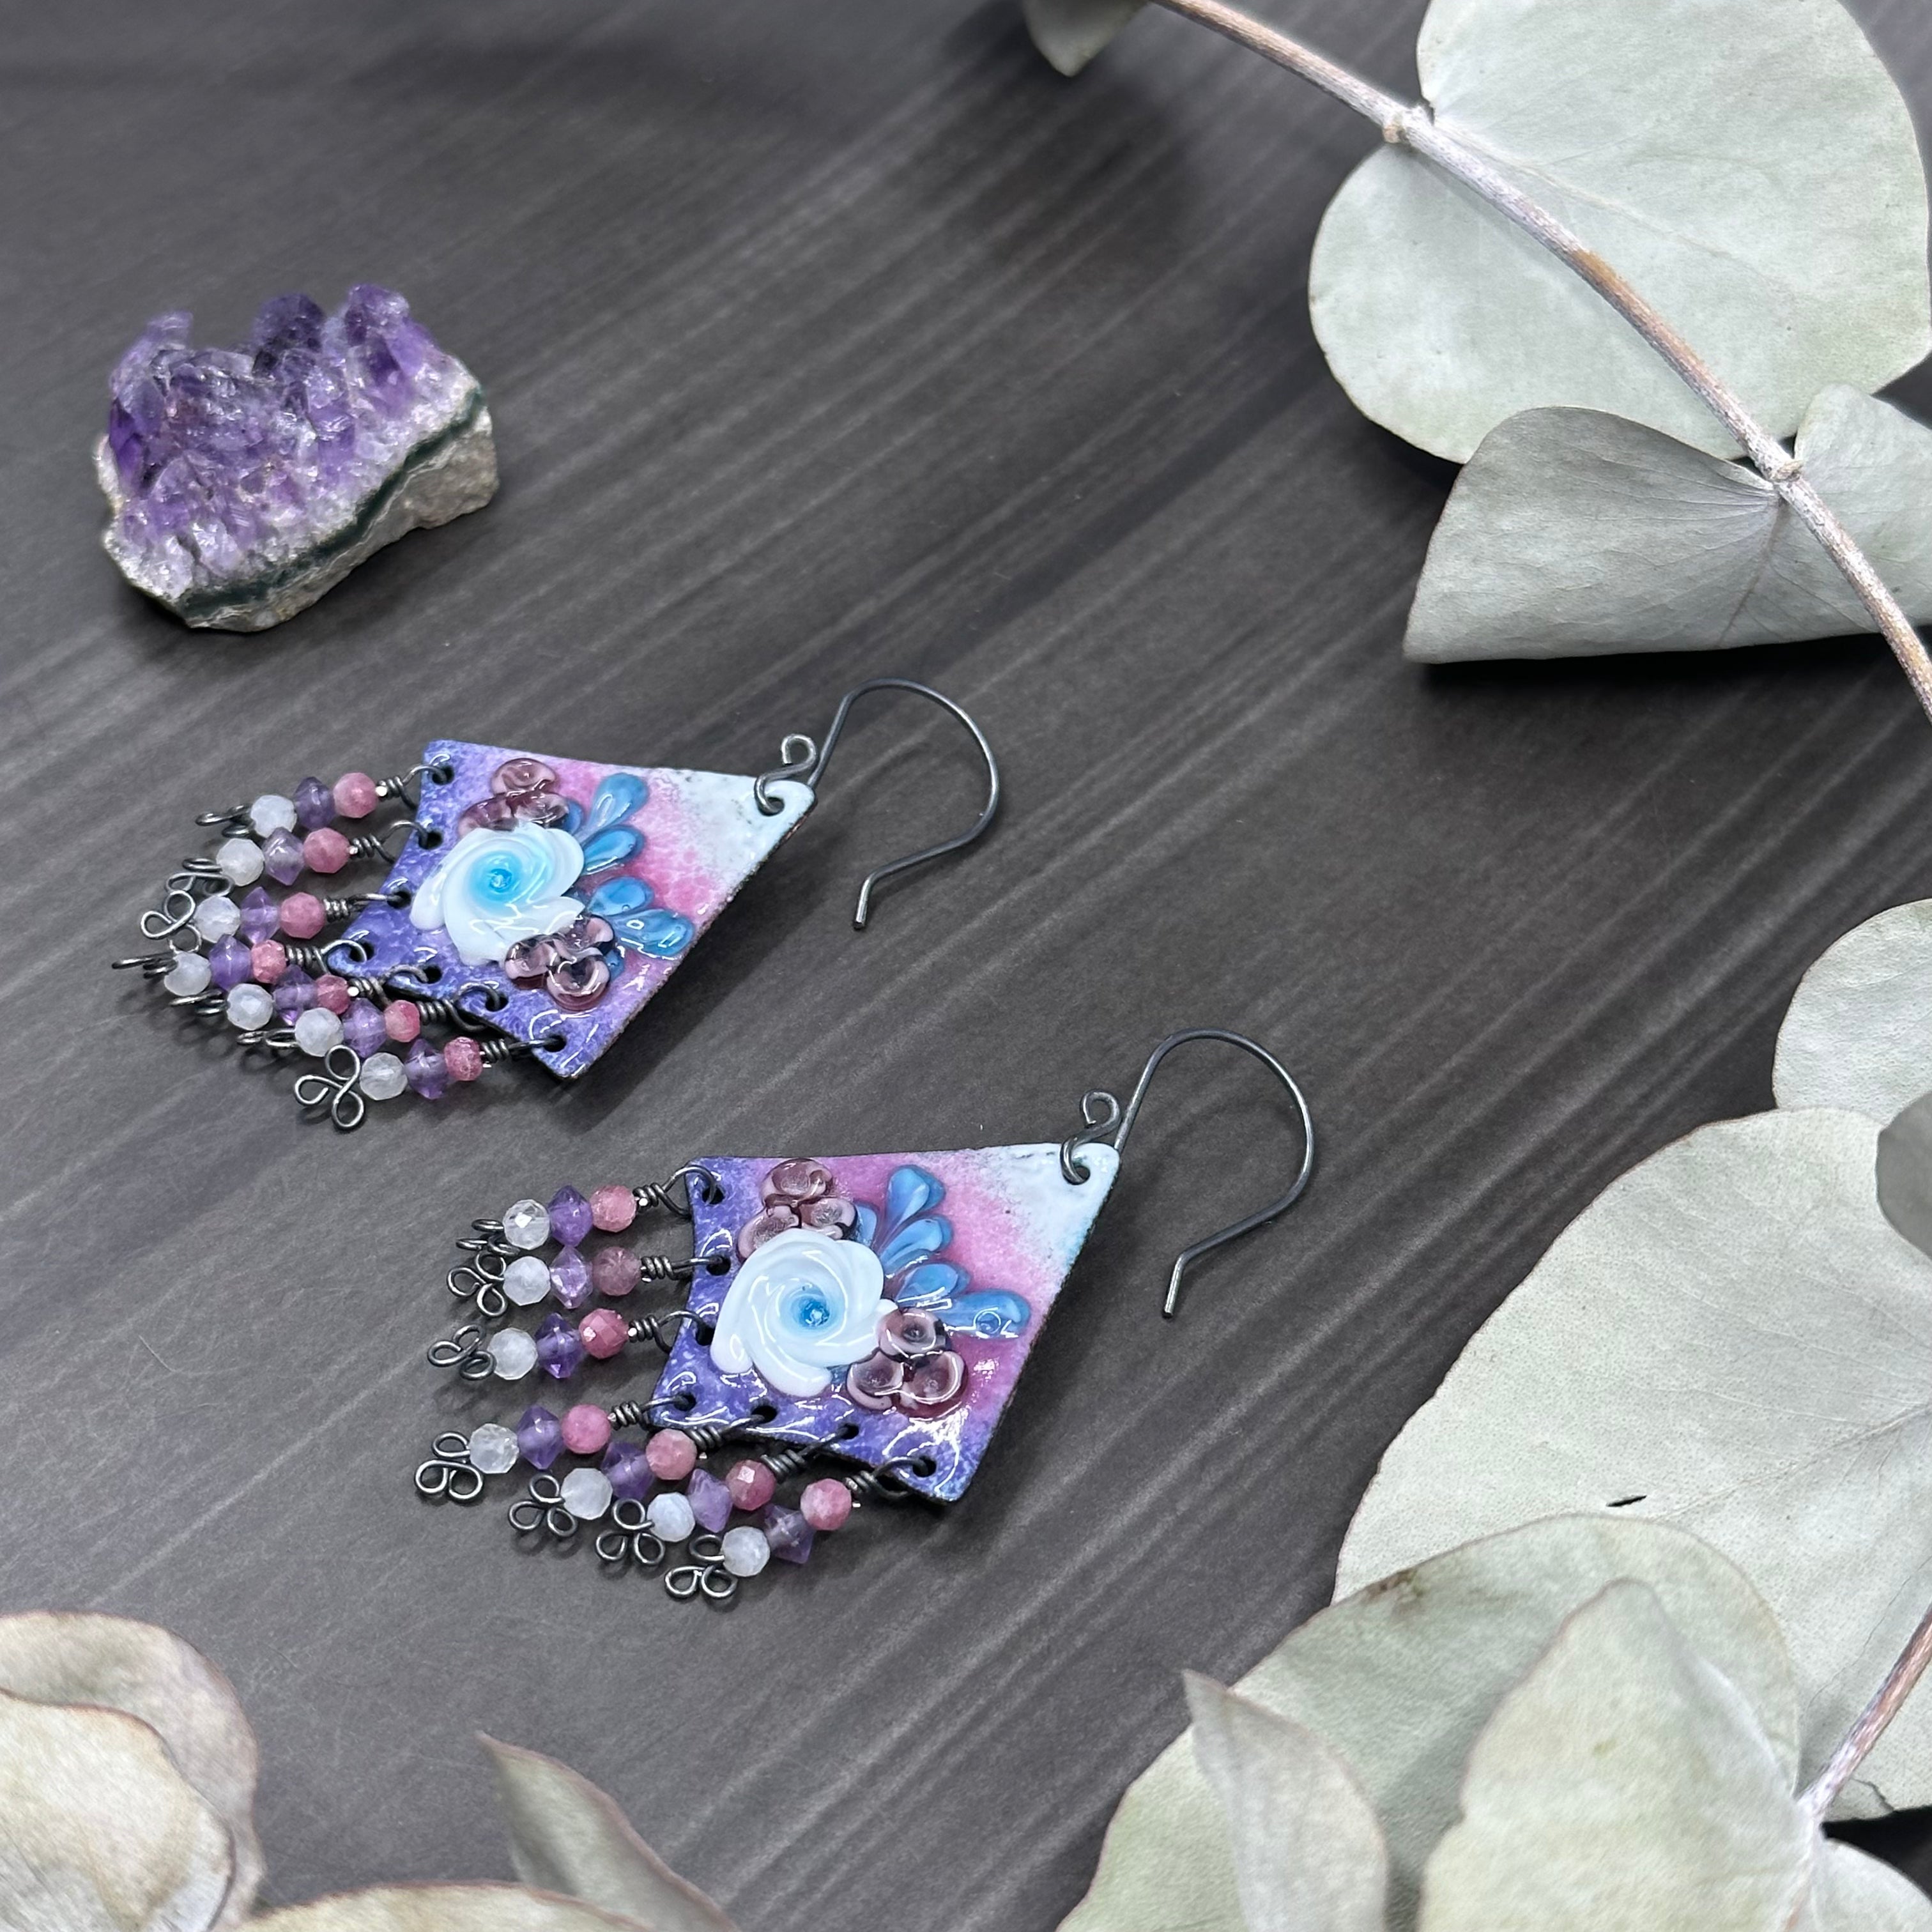 Floral Chandelier Earrings with Tourmaline, Moonstone, and Amethyst